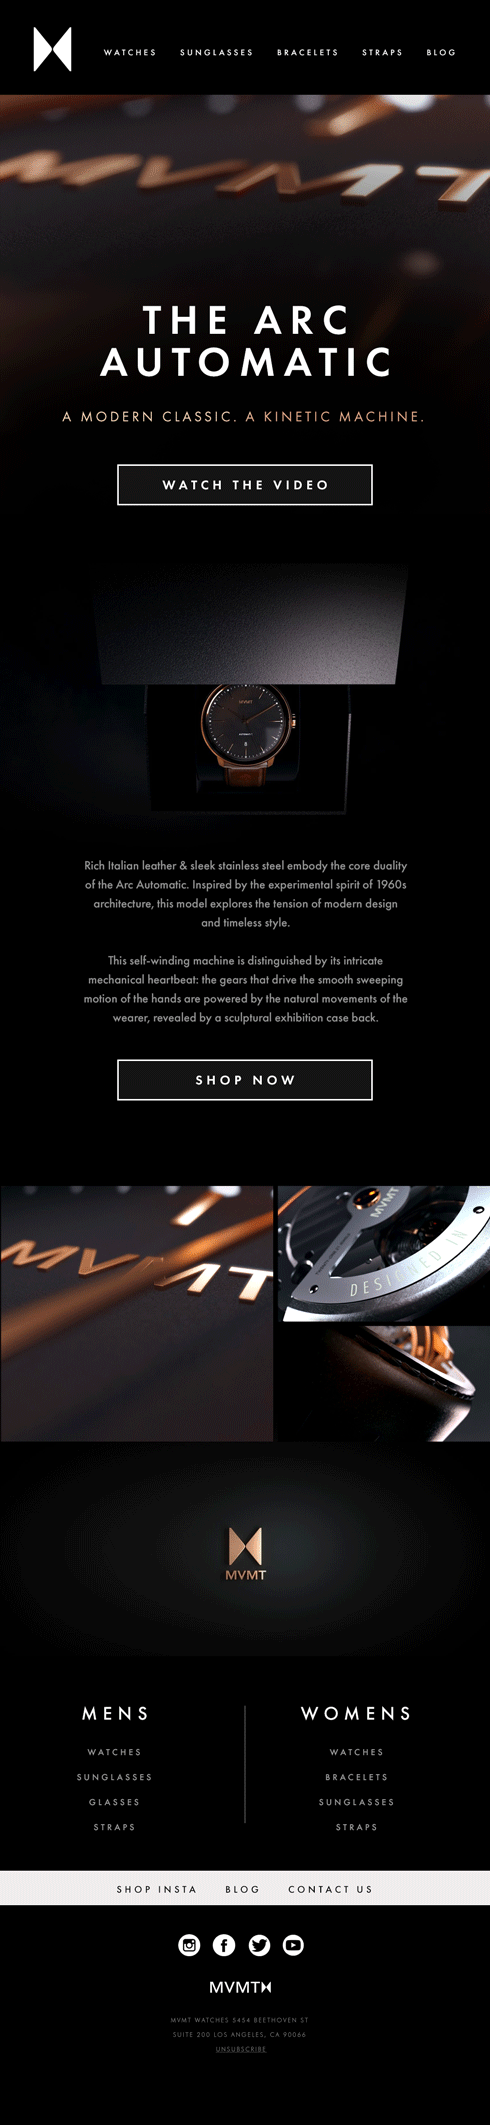 email animation mvmt watches